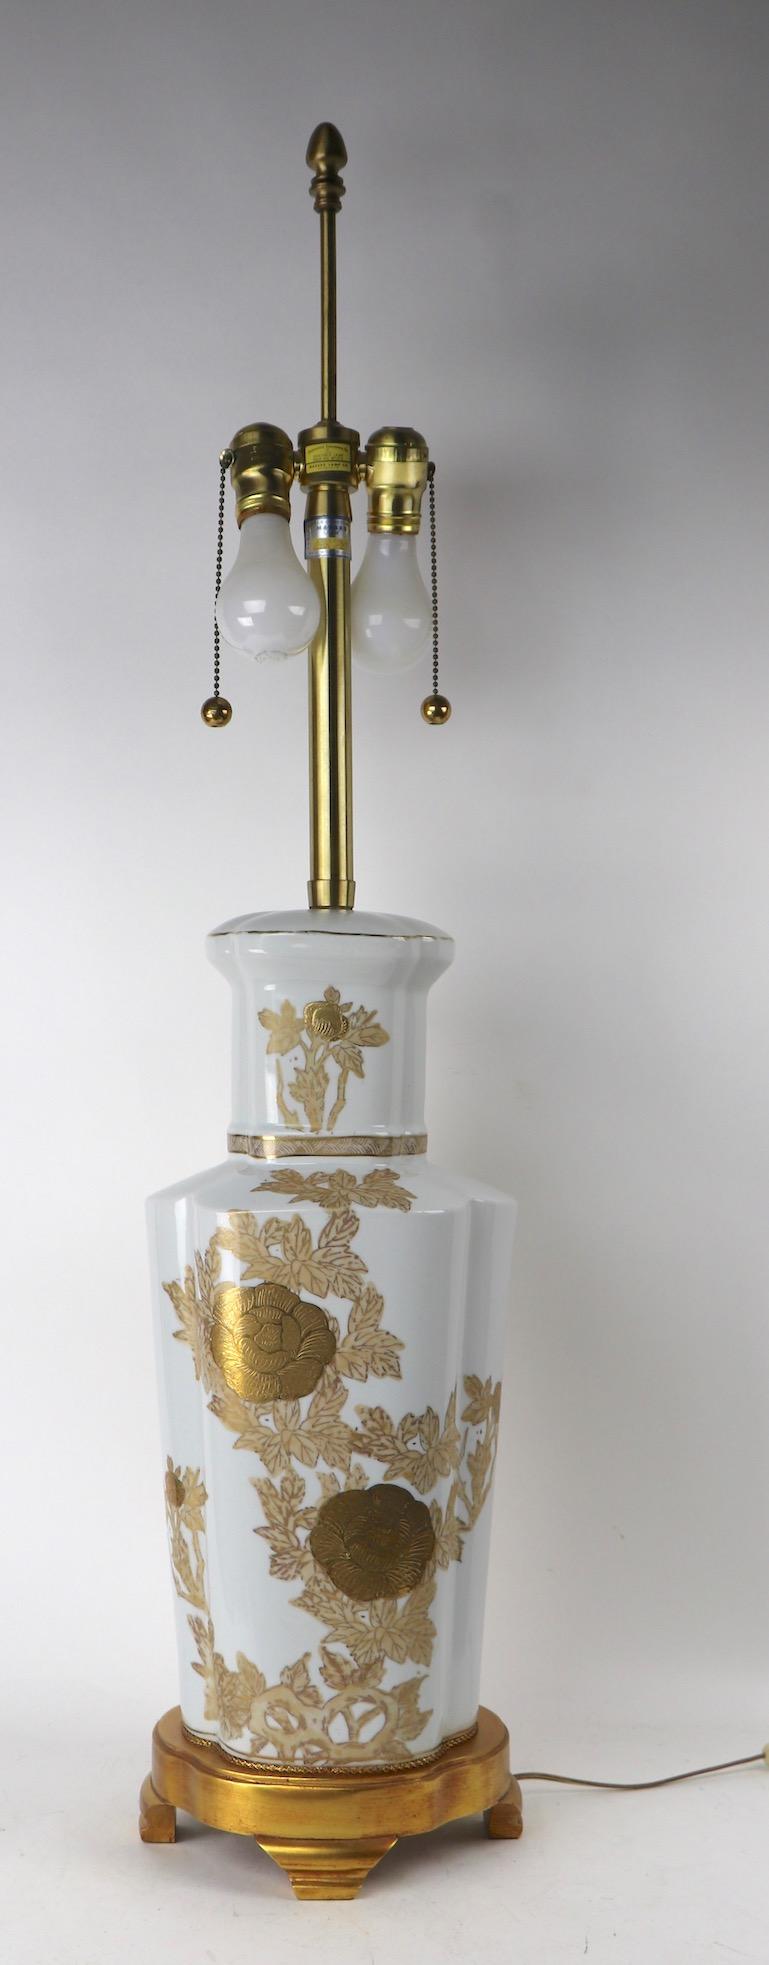 20th Century Chinese Style Porcelain Lamp by the Marlboro Lamp Company